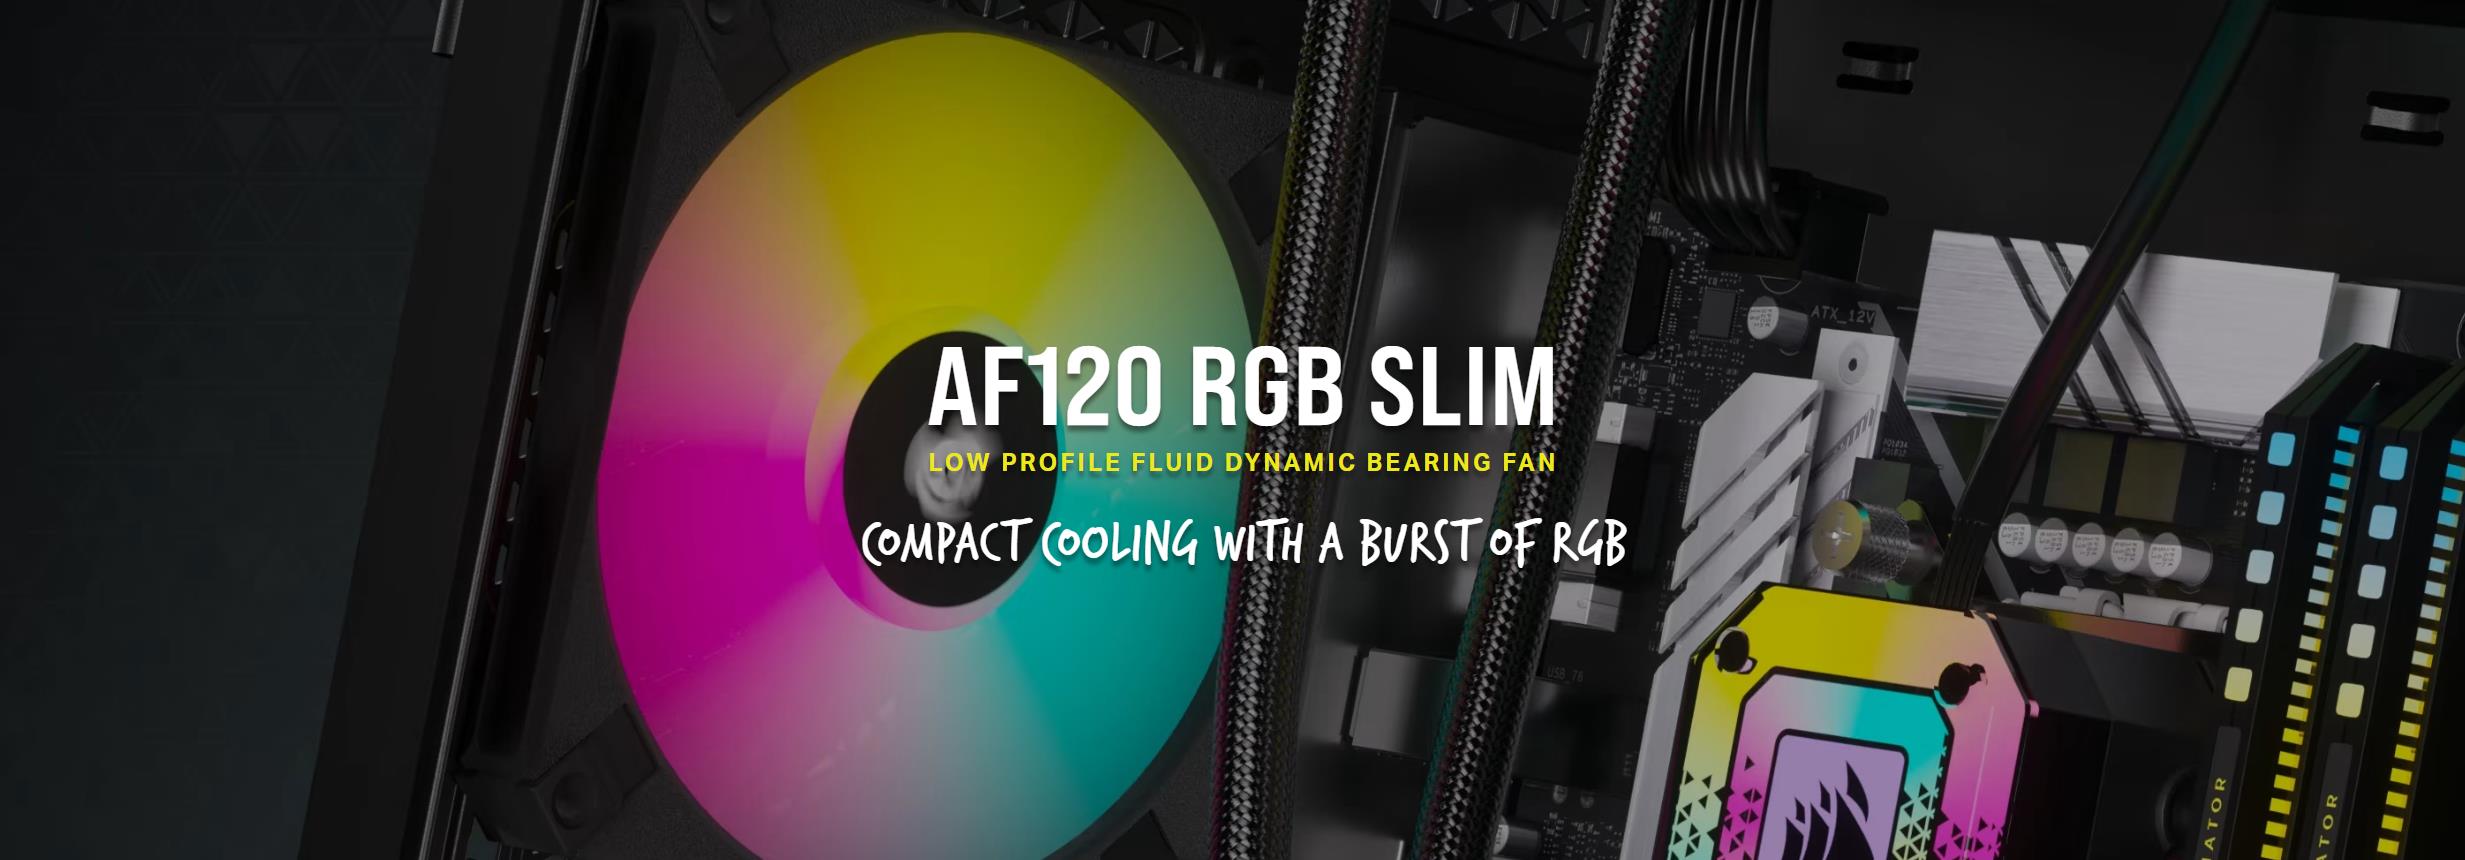 A large marketing image providing additional information about the product Corsair iCUE AF120 RGB SLIM 120mm PWM Fluid Dynamic Bearing Fan — Black Twin Pack - Additional alt info not provided